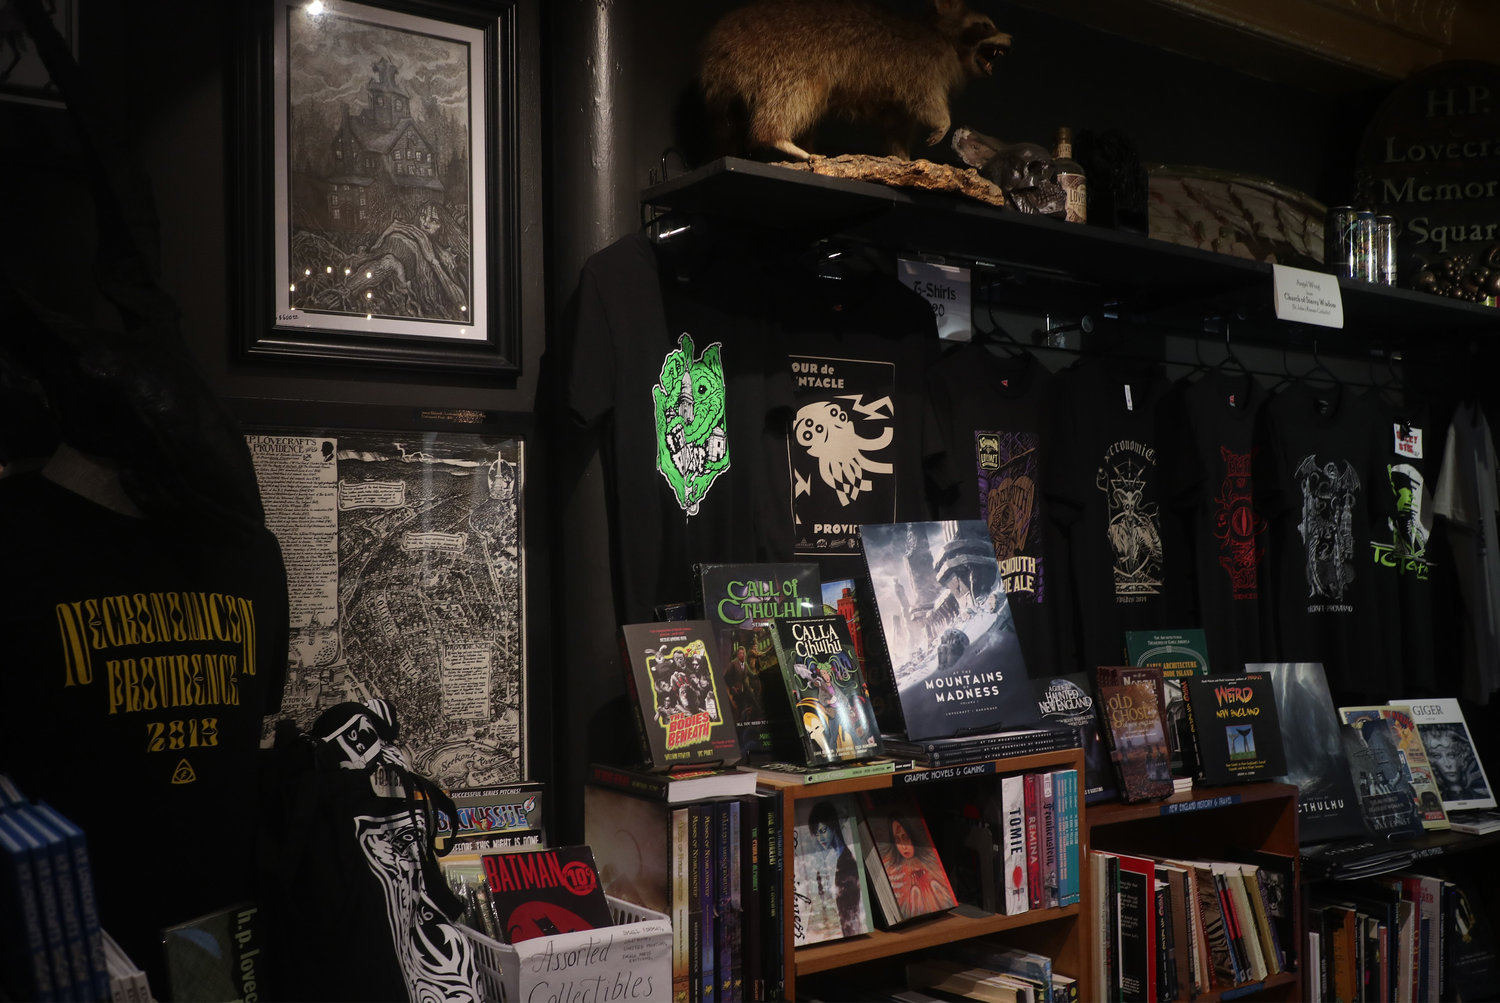 The Lovecraft Arts & Sciences headquarters in The Arcade